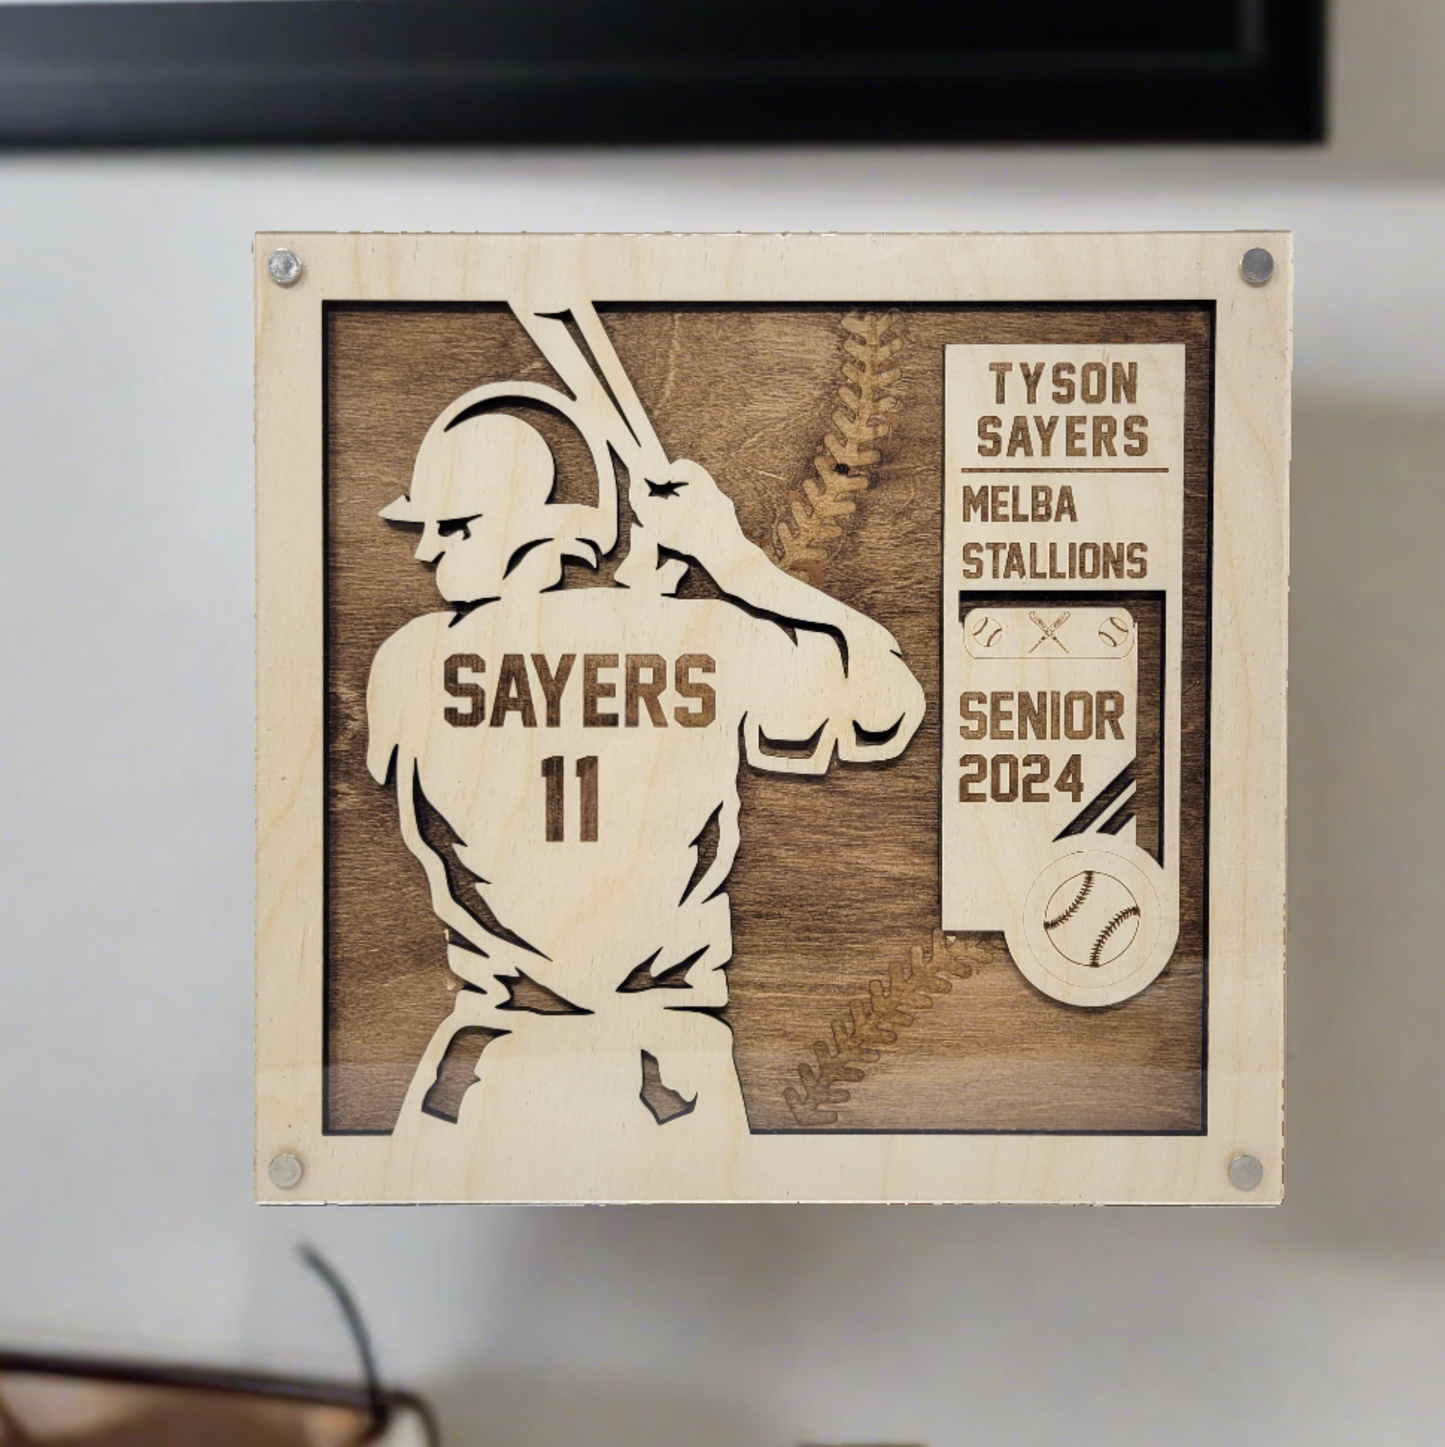 Personalized baseball player plaque with a stained background, professional photography, with a name, year, and team engraved, also personalized with a baseball logo